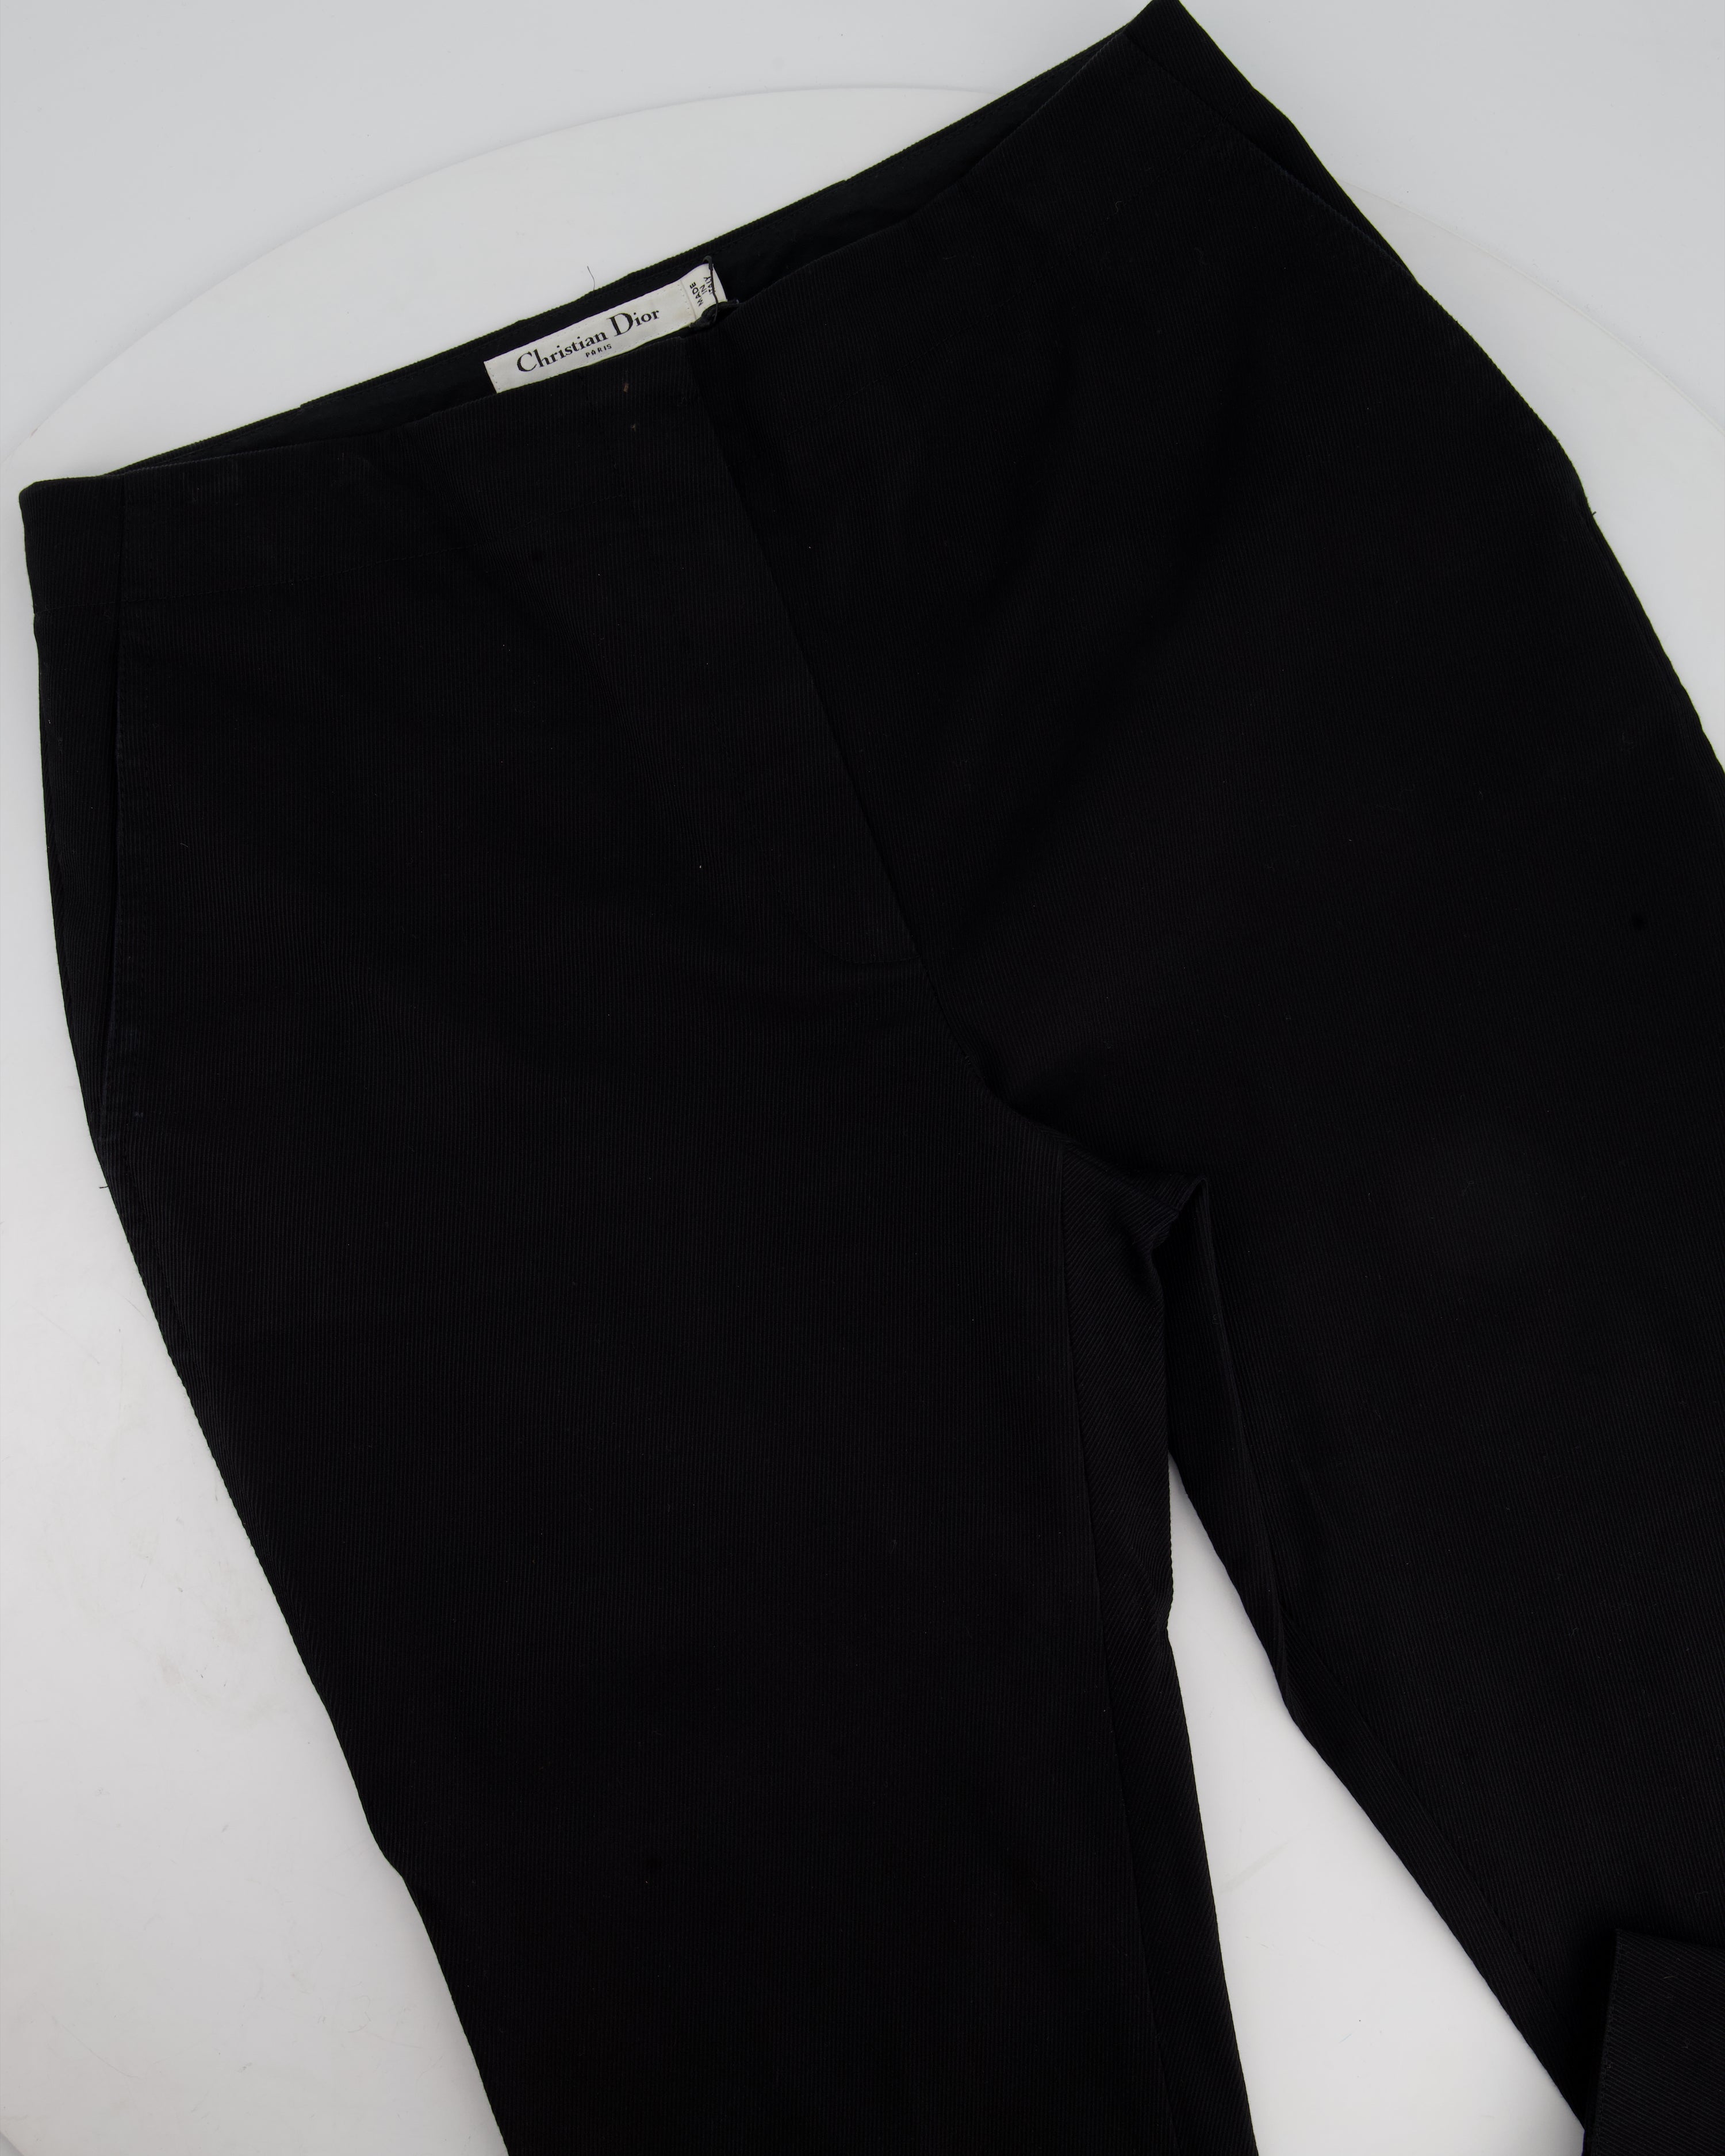 DIOR 1350$ Men's White Cotton Flat Front Trousers With Leg Strap | eBay